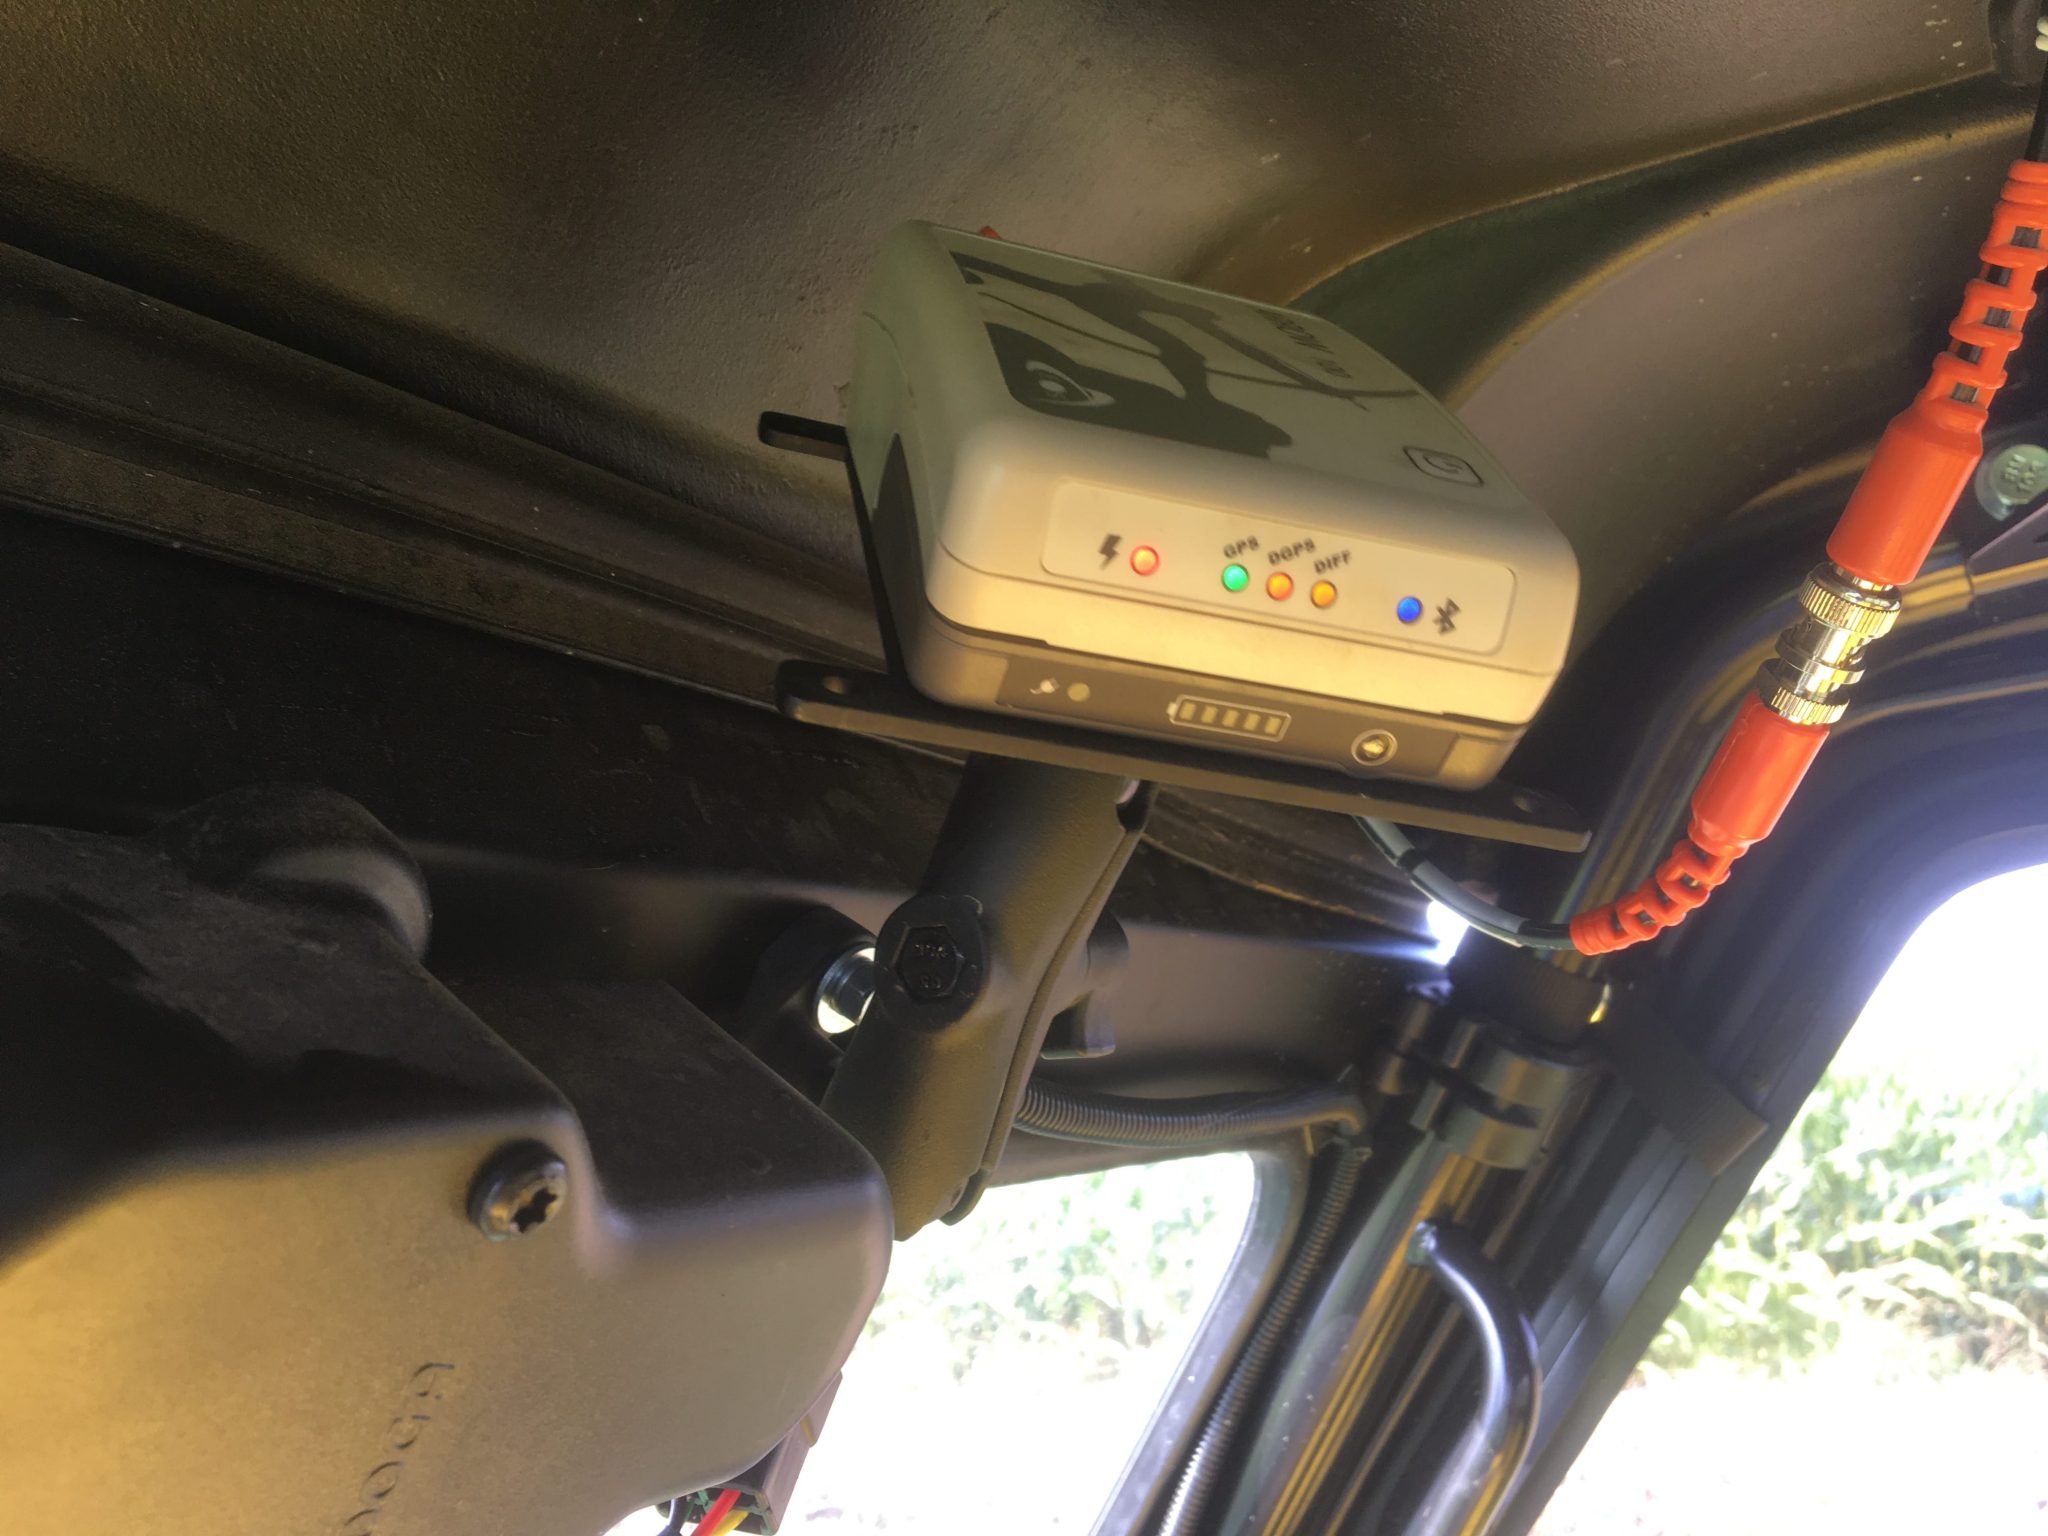 The Arrow 100 is mounted onto the ATV and connected via Bluetooth® to a Vanquisher rugged tablet to collect location data on board in real time.